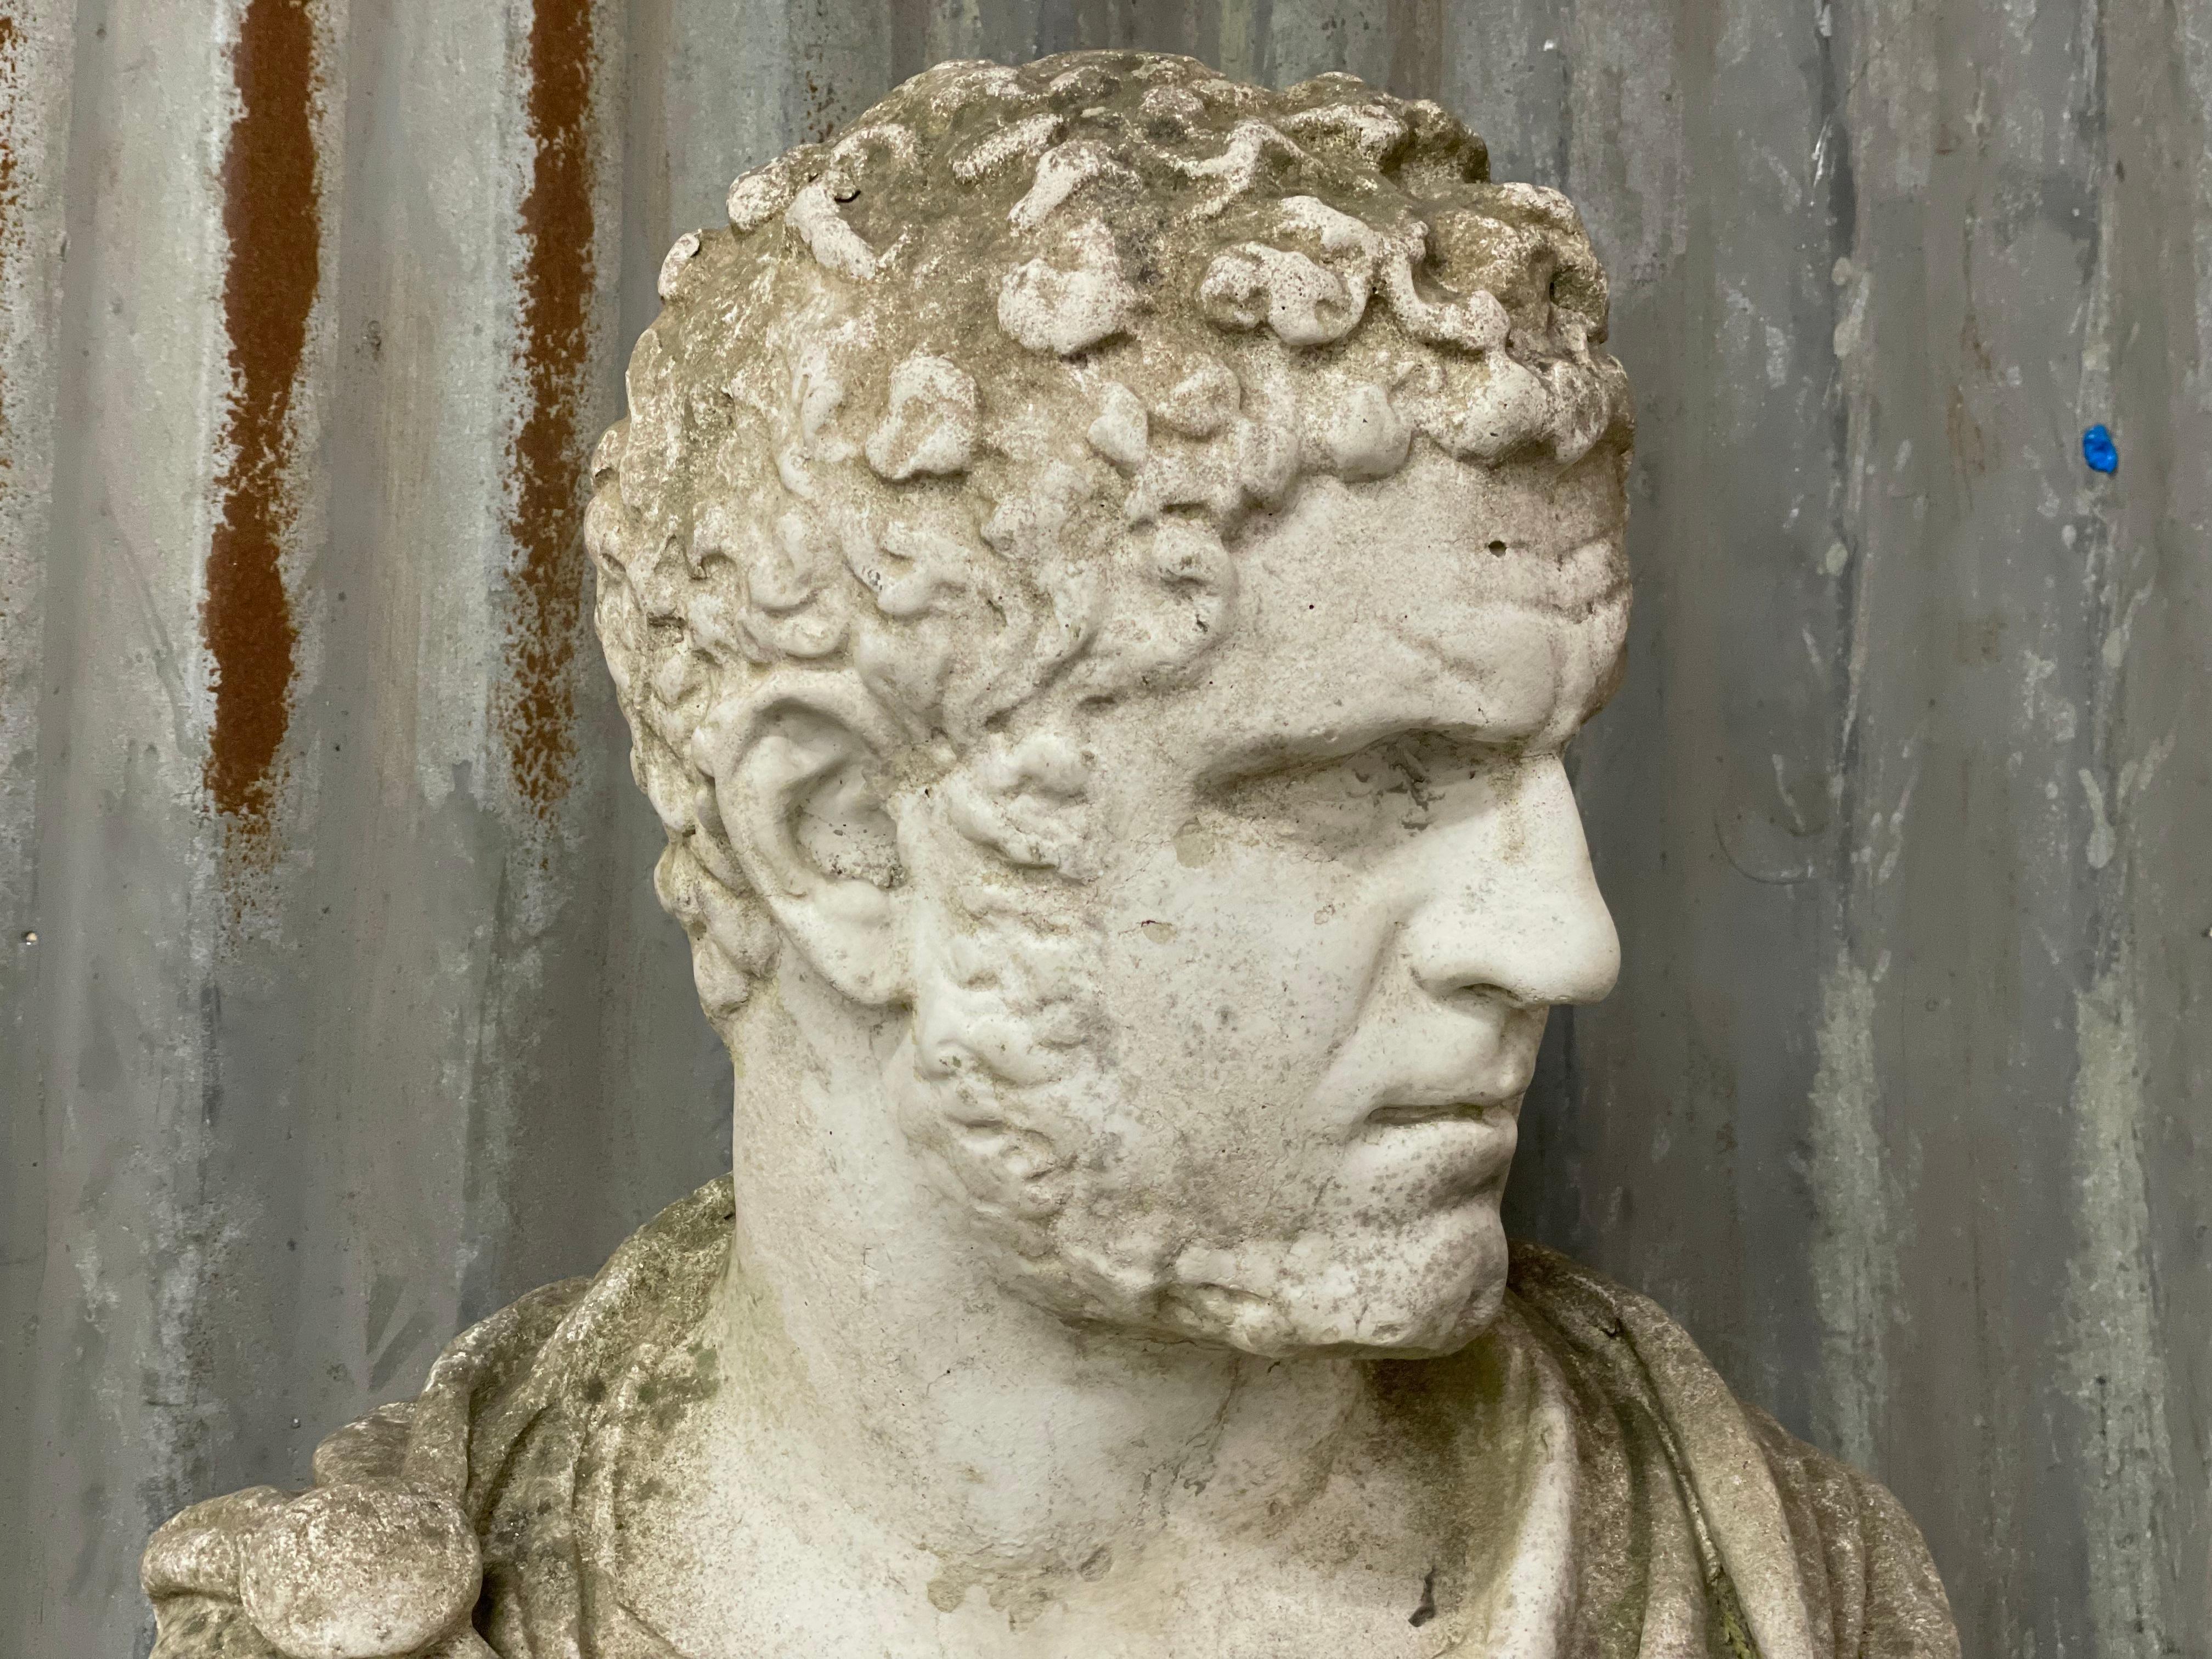 An English vintage bust after the 3rd Century Roman Emperor Caracalla atop a classical iconic fluted column. Lovely patina.

Wonderful patina